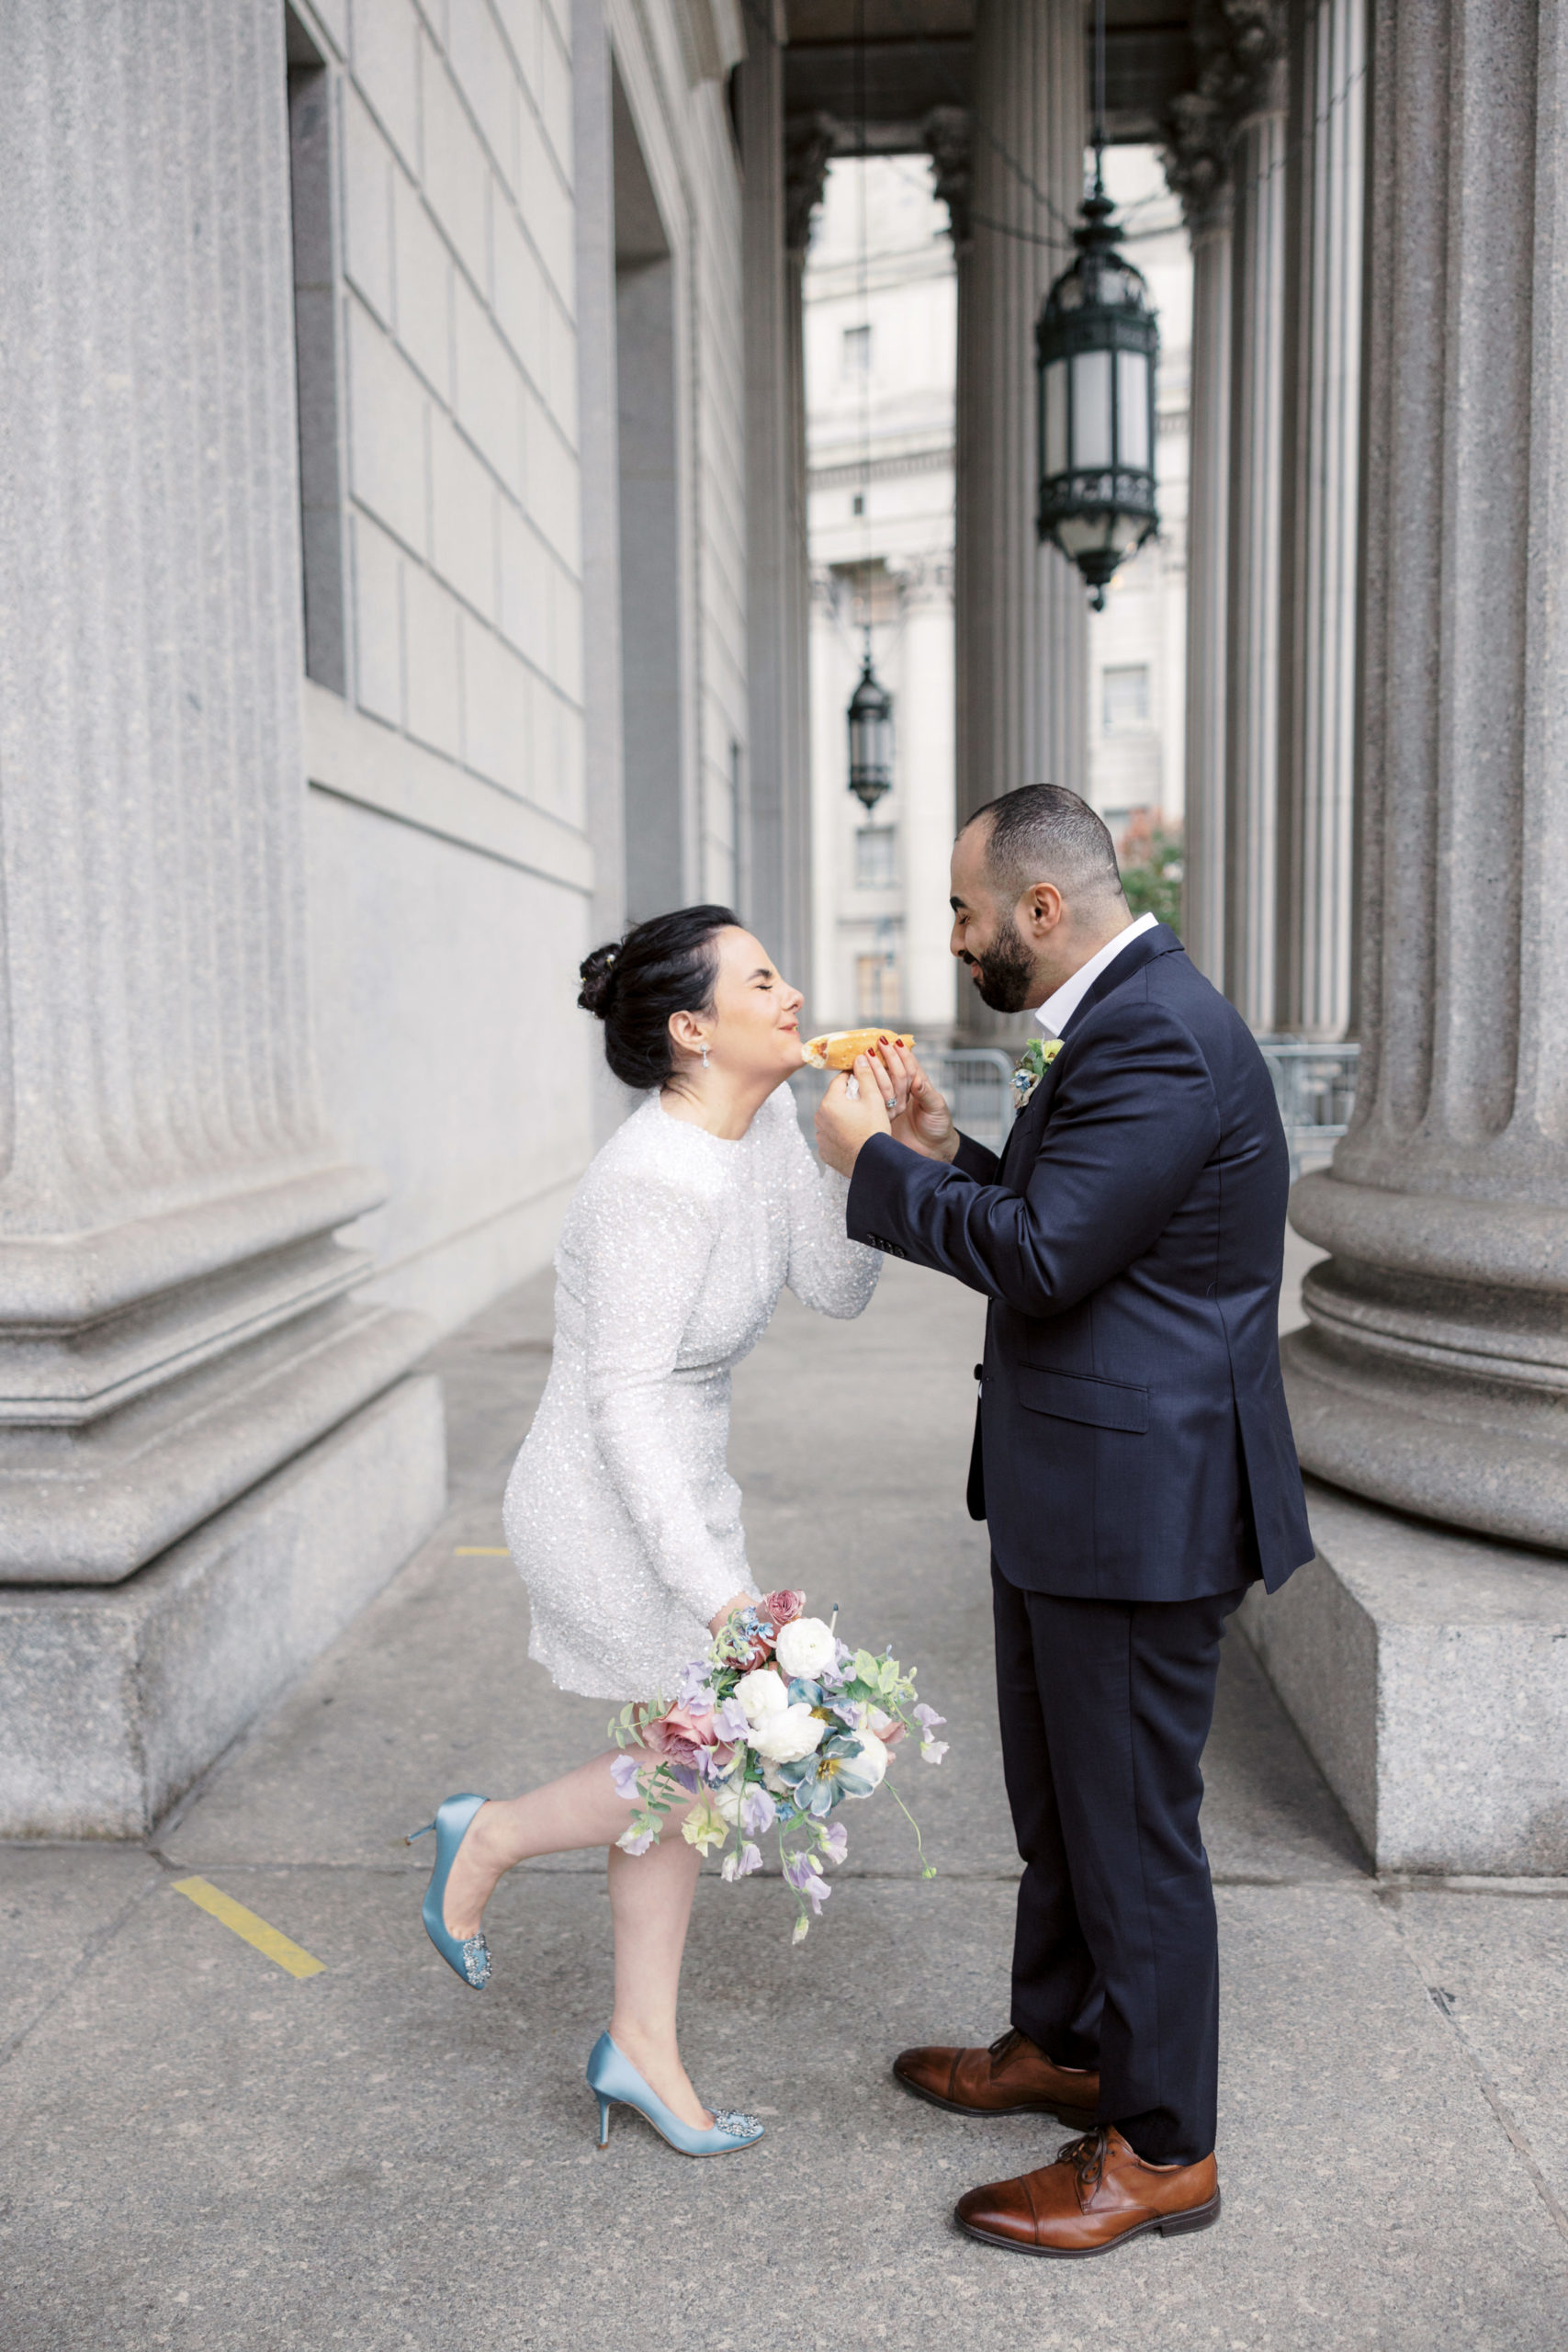 The newly-weds are having a fun time eating hotdogs after their NYC City Hall wedding. Image by Jenny Fu Studio